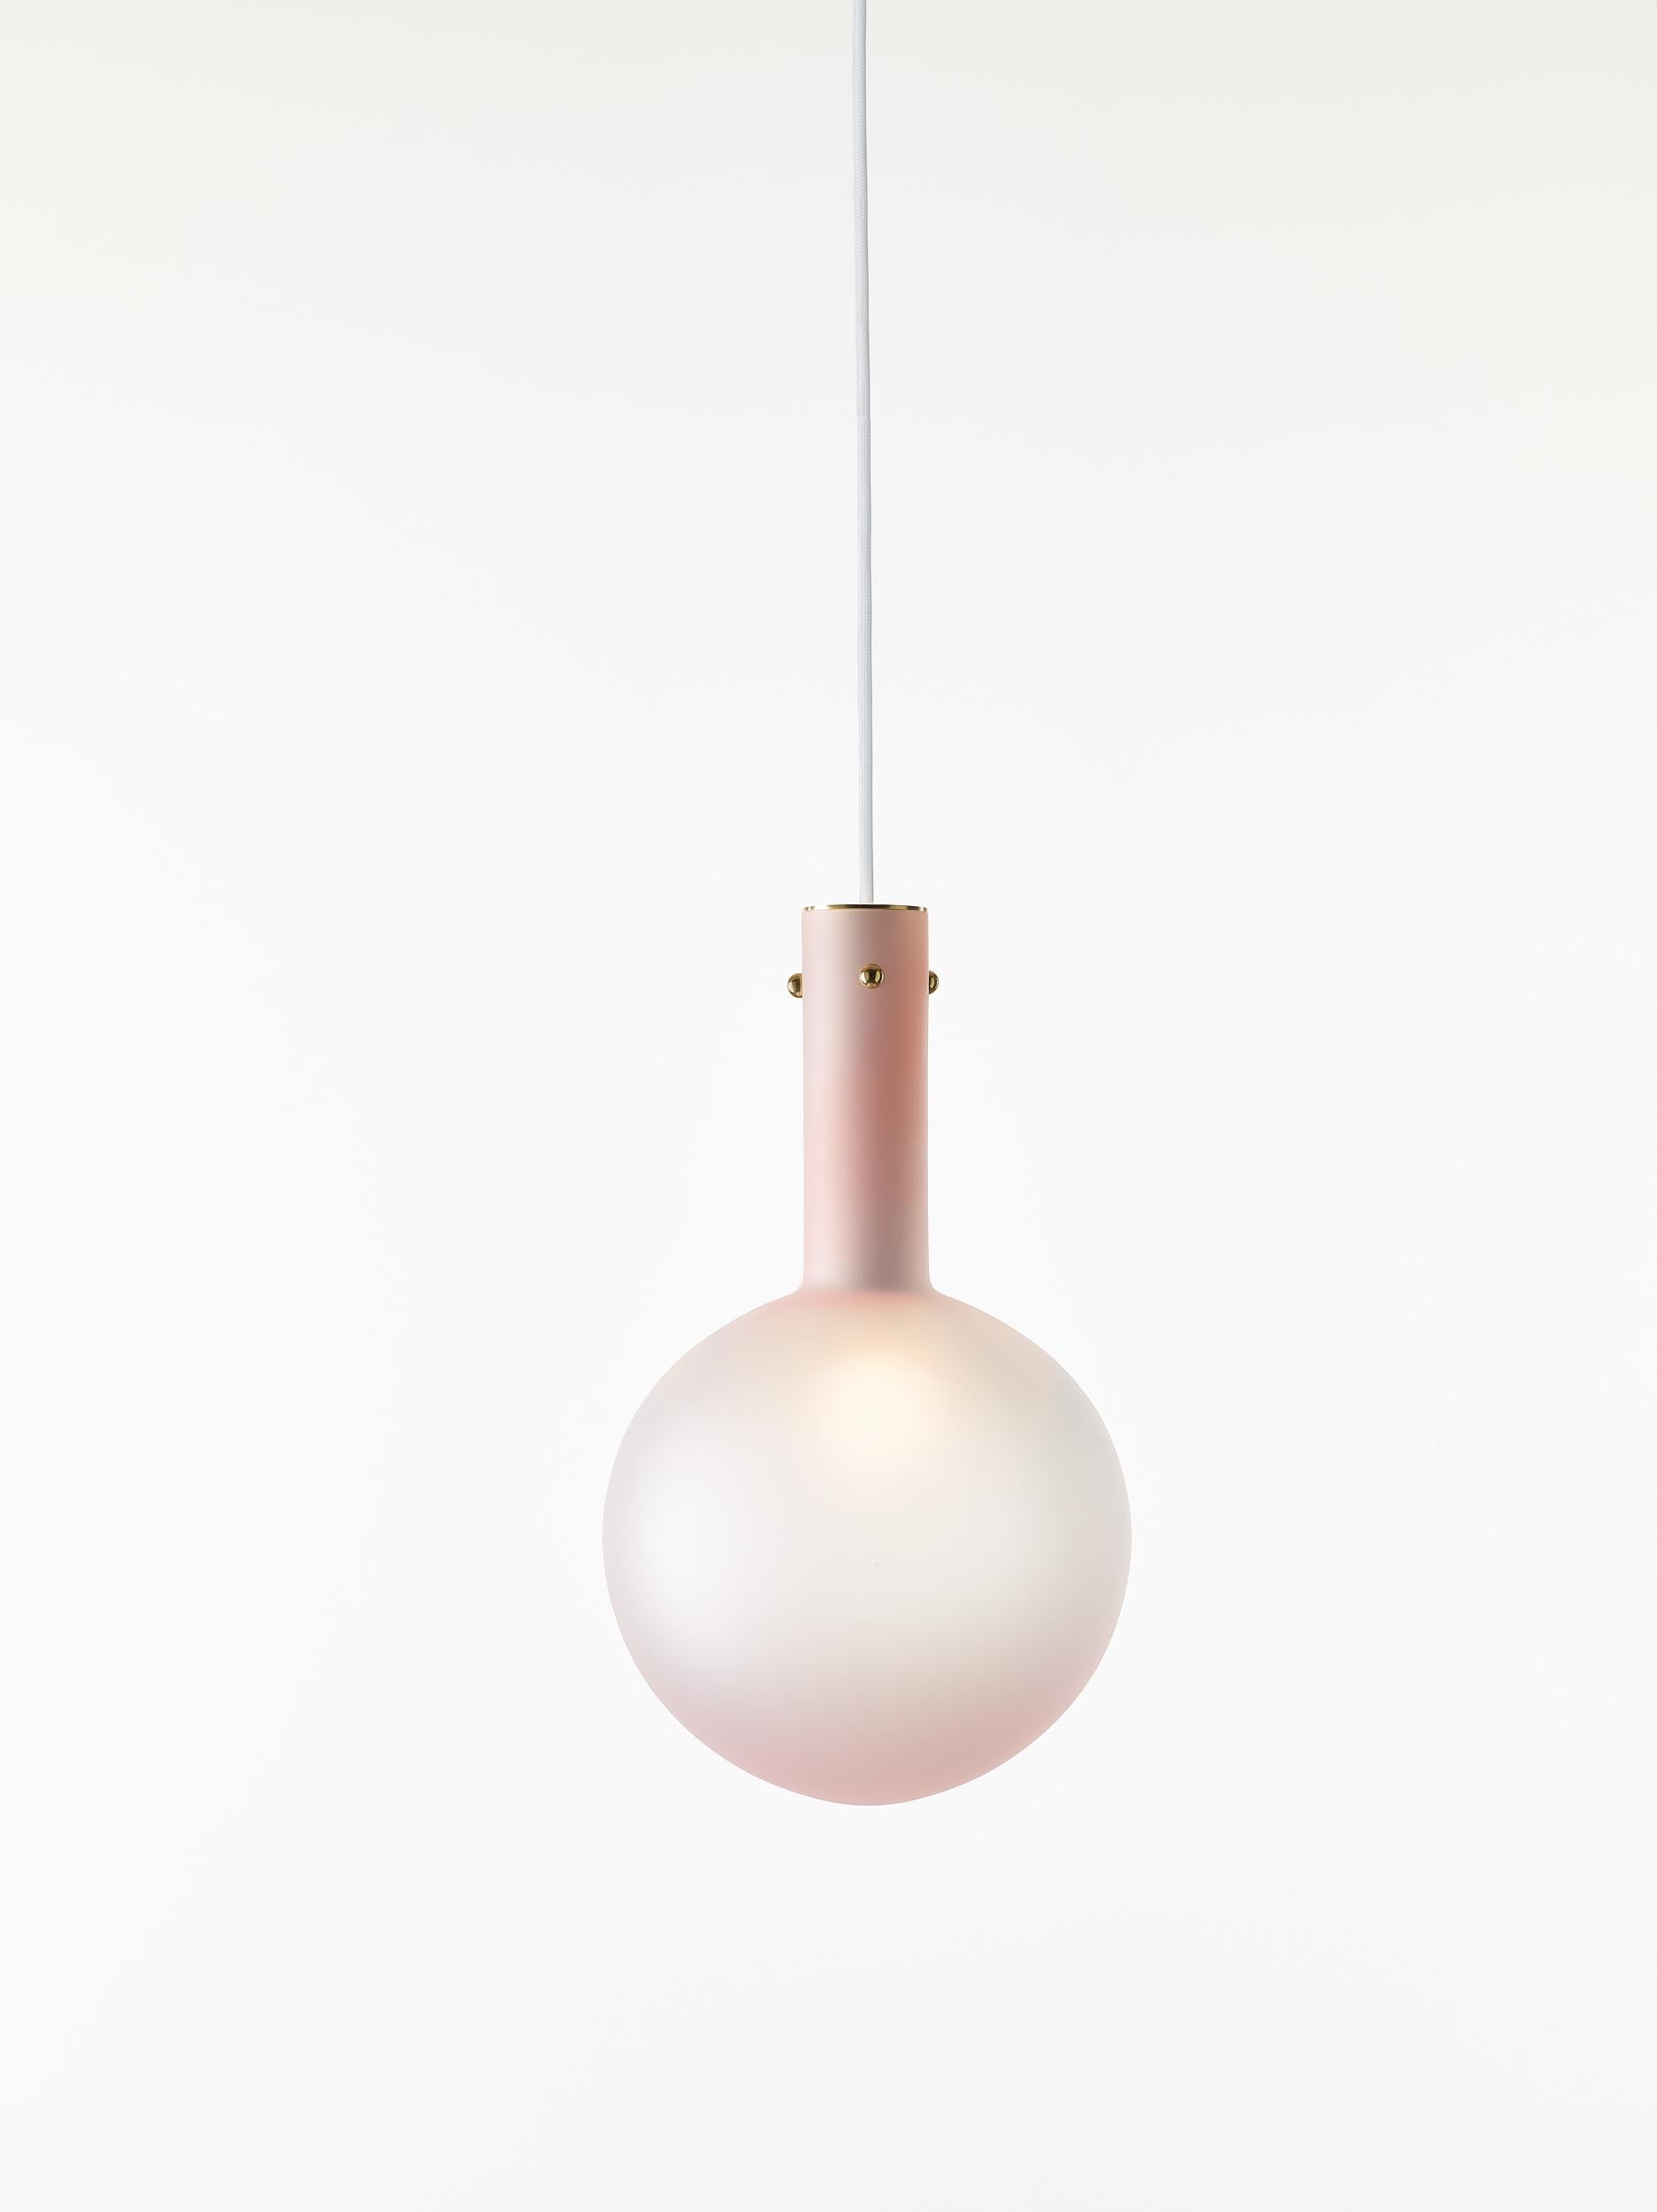 Matte pink Sphaerae pendant light by Dechem studio
Dimensions: D 20 x H 180 cm
Materials: brass, metal and glass.
Also available: Different finishes and colors available.

Only one homogenous piece of hand-blown glass creates the main body of